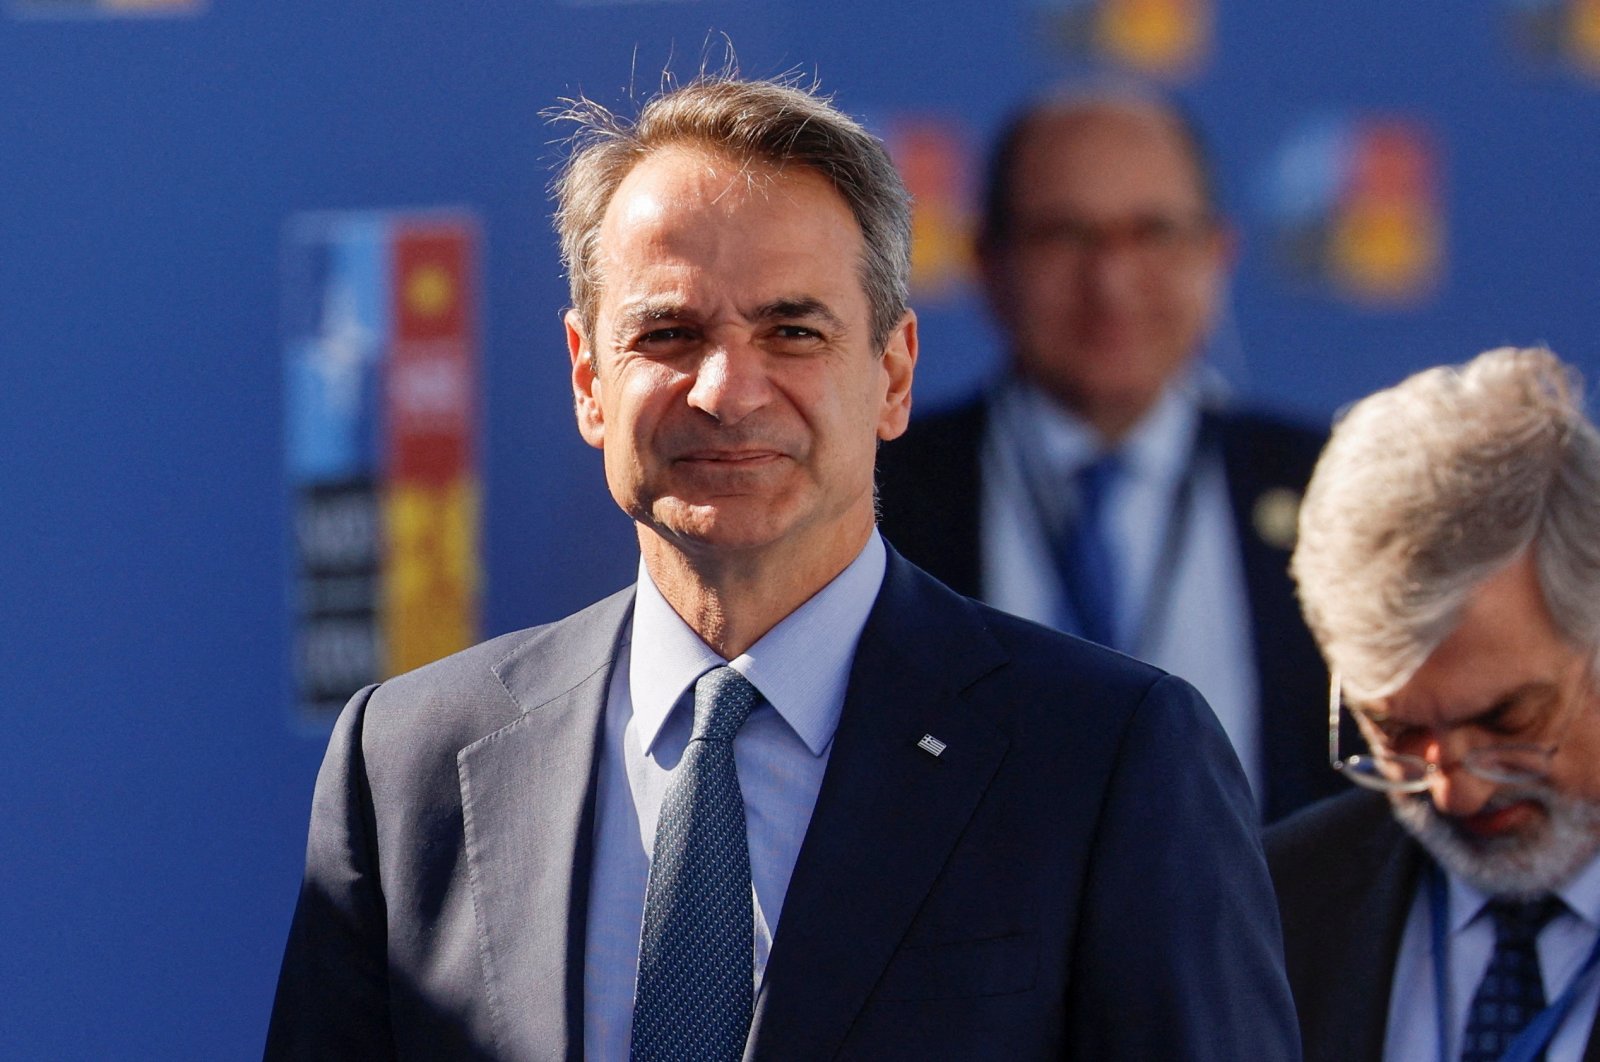 Greek Prime Minister Kyriakos Mitsotakis attends a NATO summit in Madrid, Spain, June 30, 2022. (Reuters Photo)